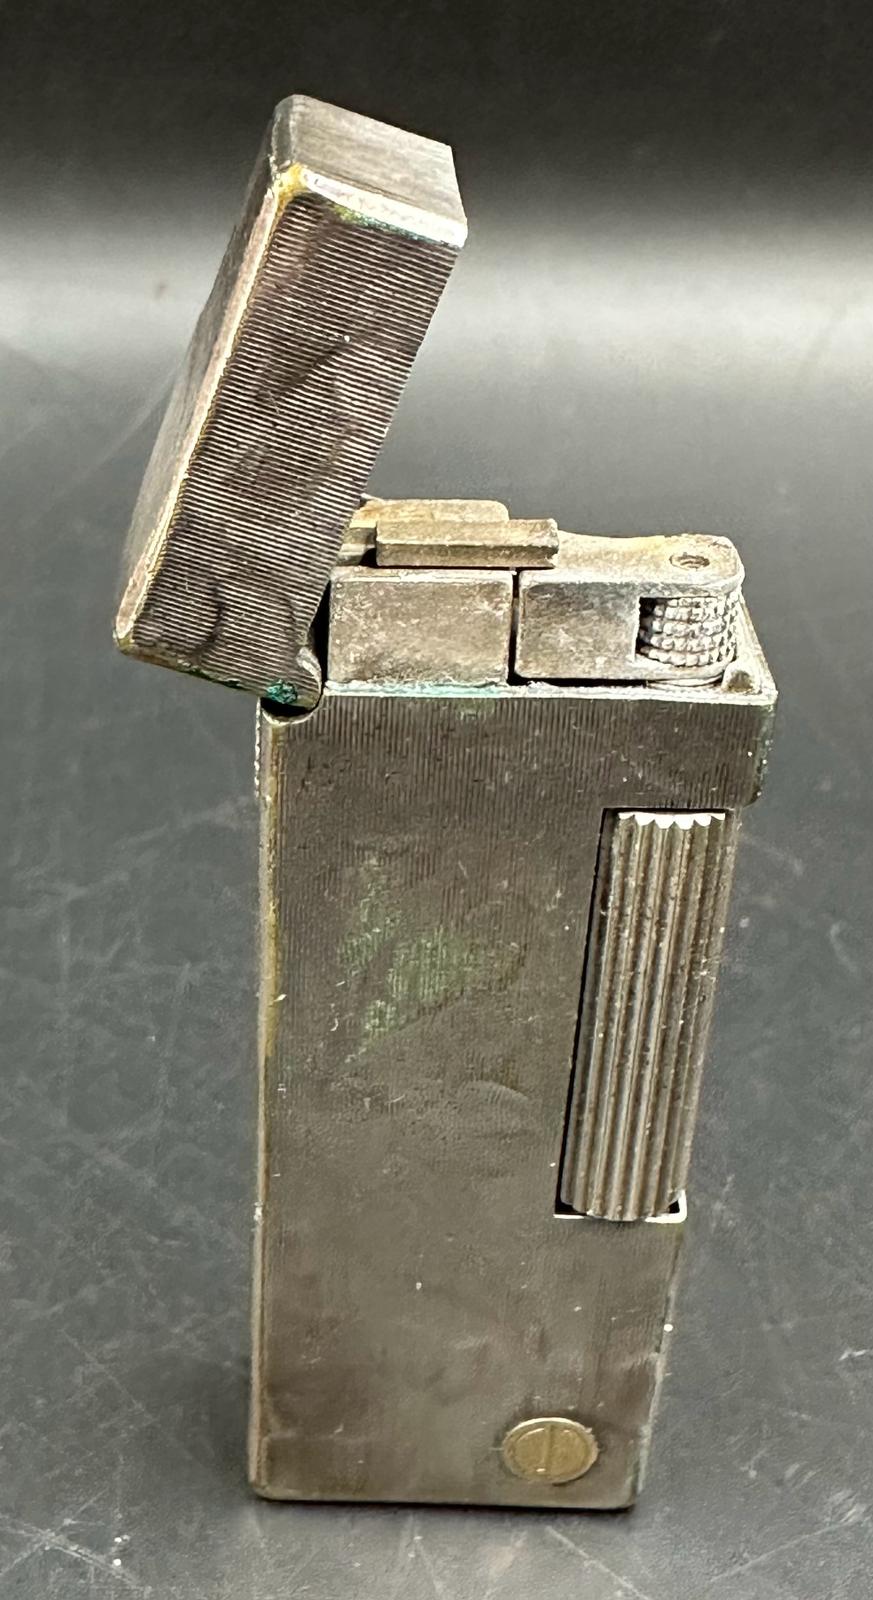 A Dunhill white metal lighter in original box with original paperwork, cards etc. - Image 2 of 5